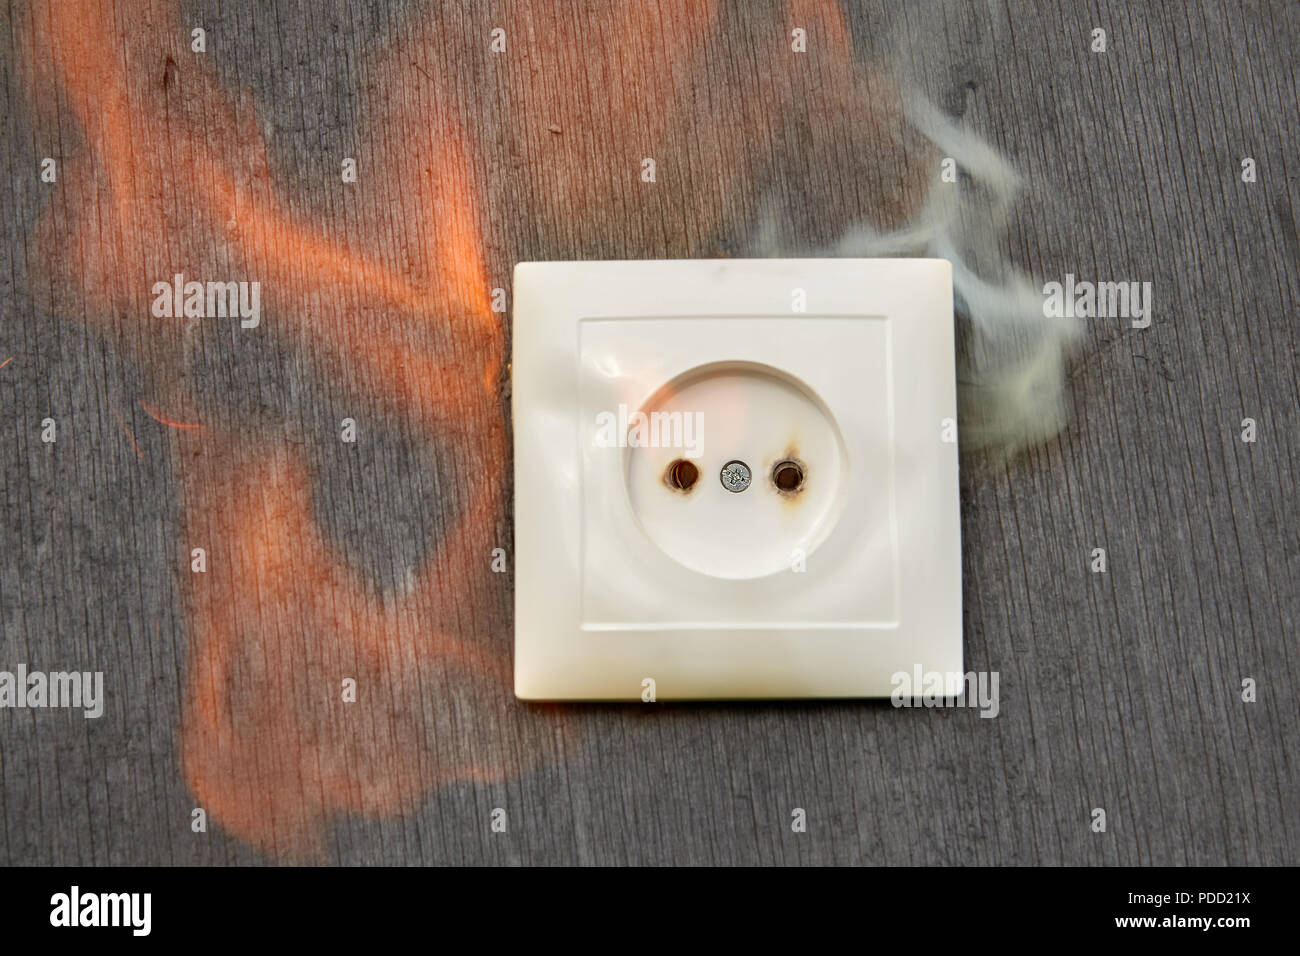 Household fire, Ignition of the plastic wall socket. Stock Photo